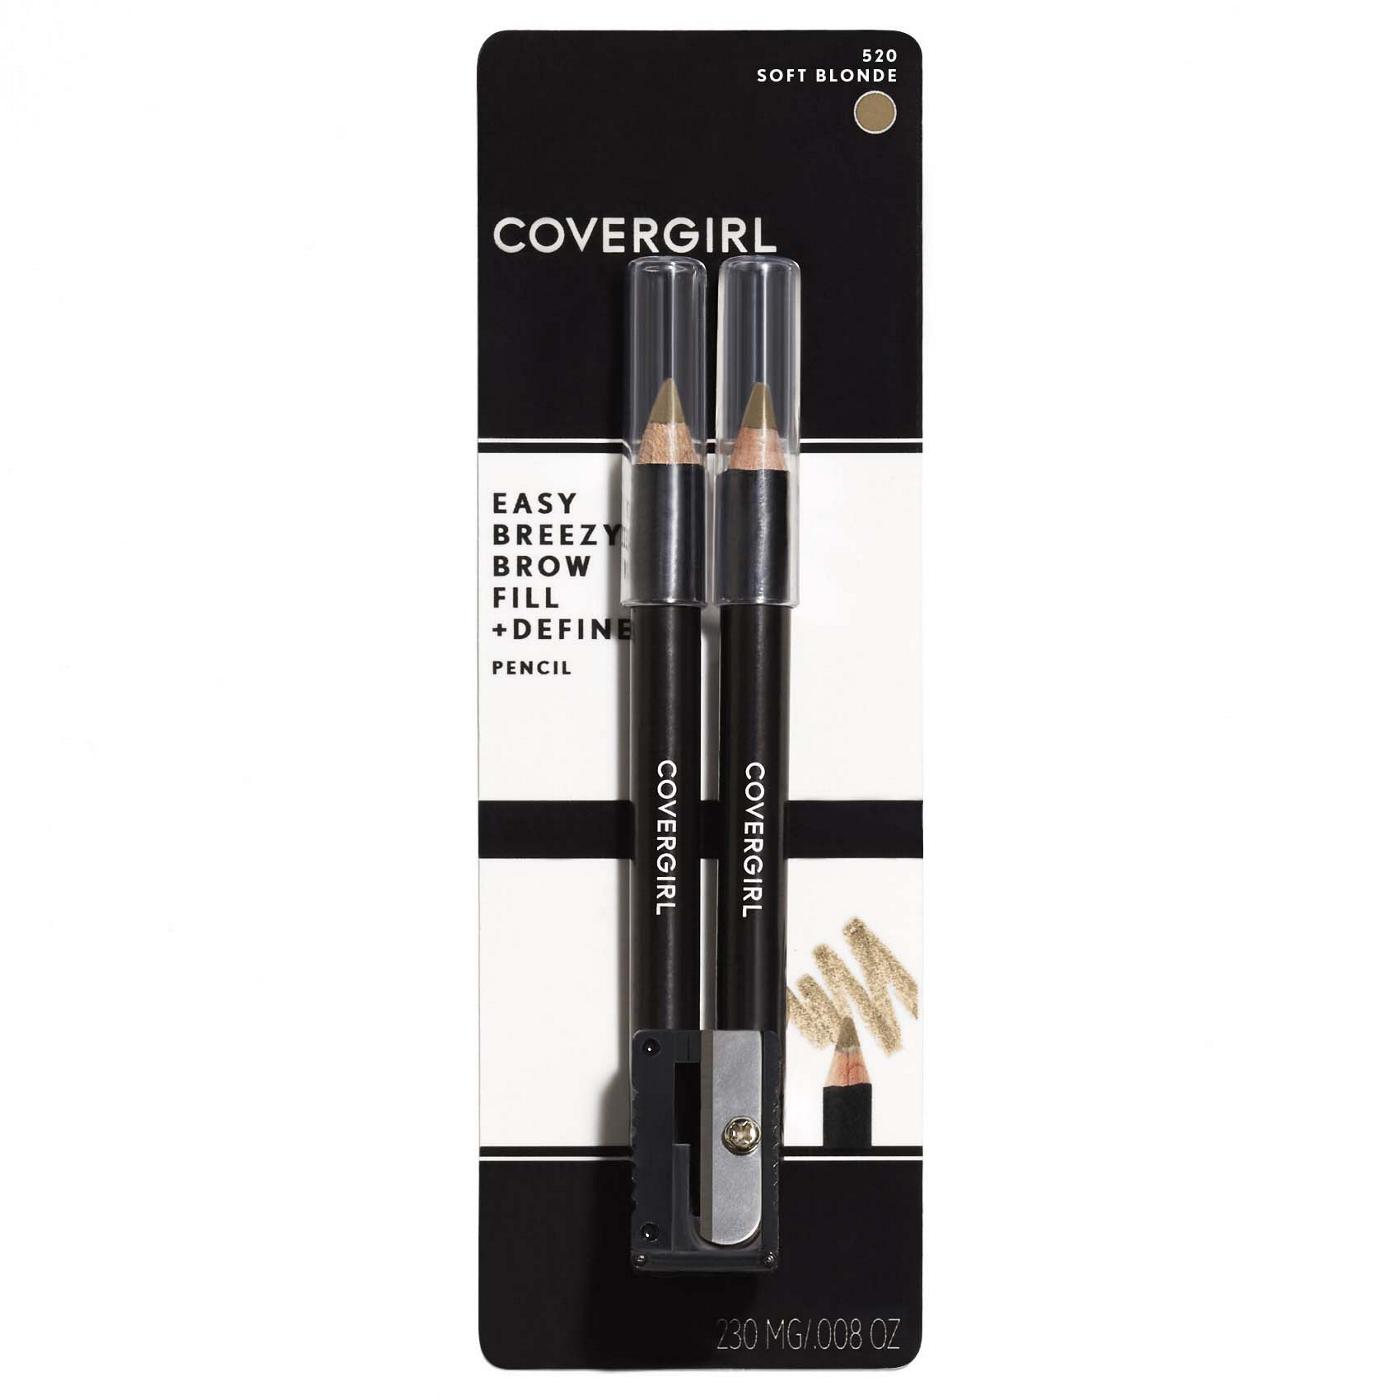 Covergirl Easy Breezy Brow Fill + Define Pencils 520 Soft Blonde; image 1 of 3